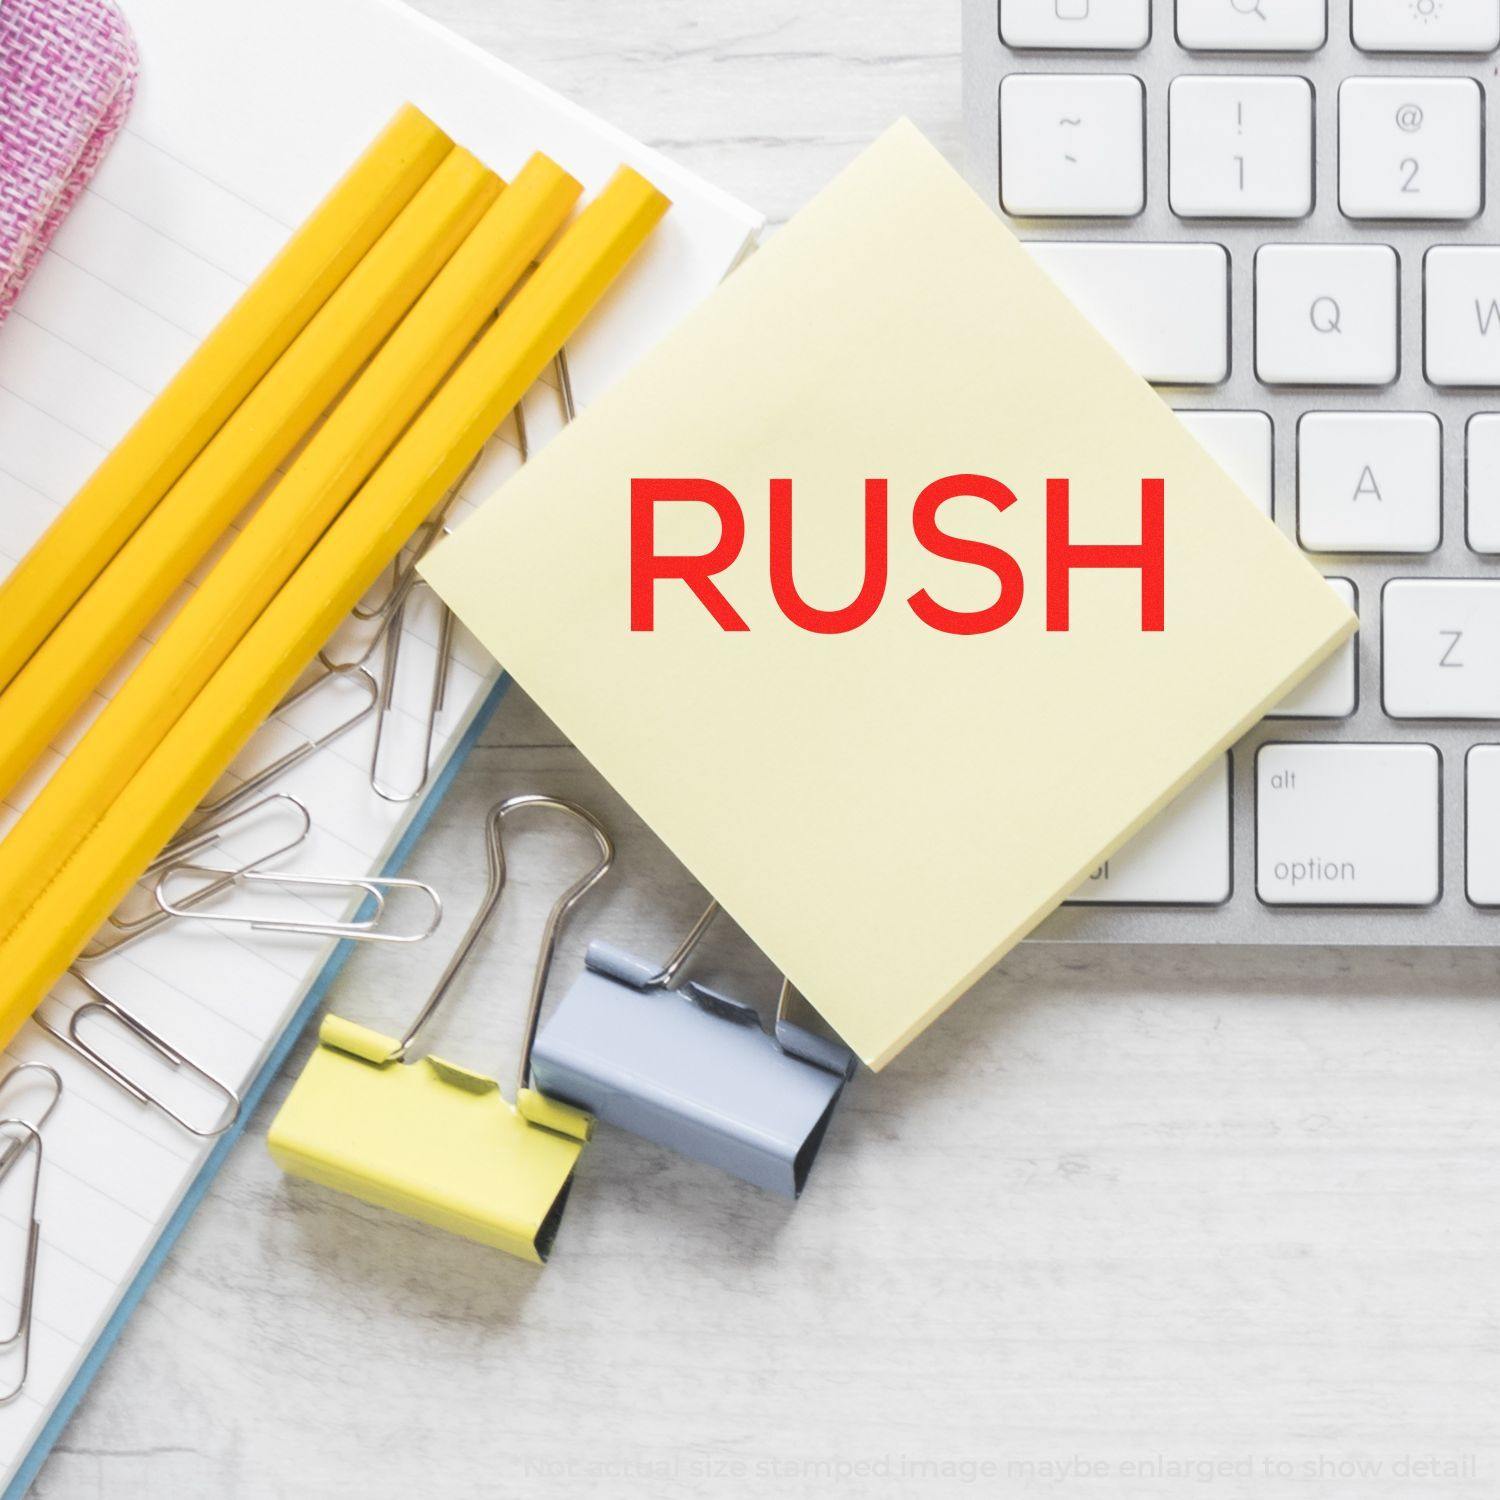 A stock office rubber stamp with a stamped image showing how the text "RUSH" in a large skinny font is displayed after stamping.